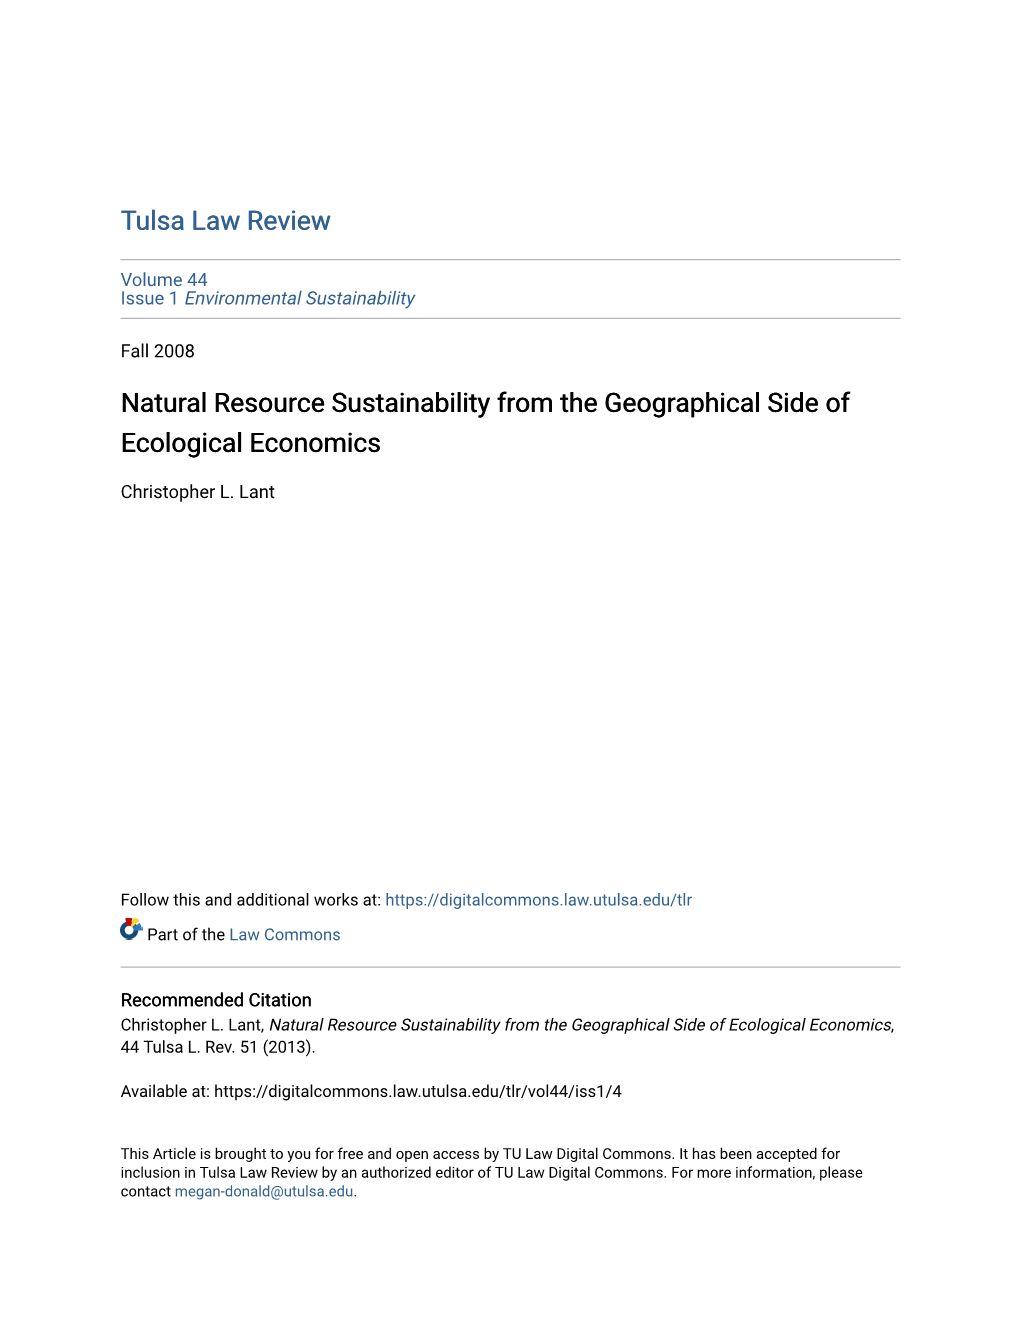 Natural Resource Sustainability from the Geographical Side of Ecological Economics